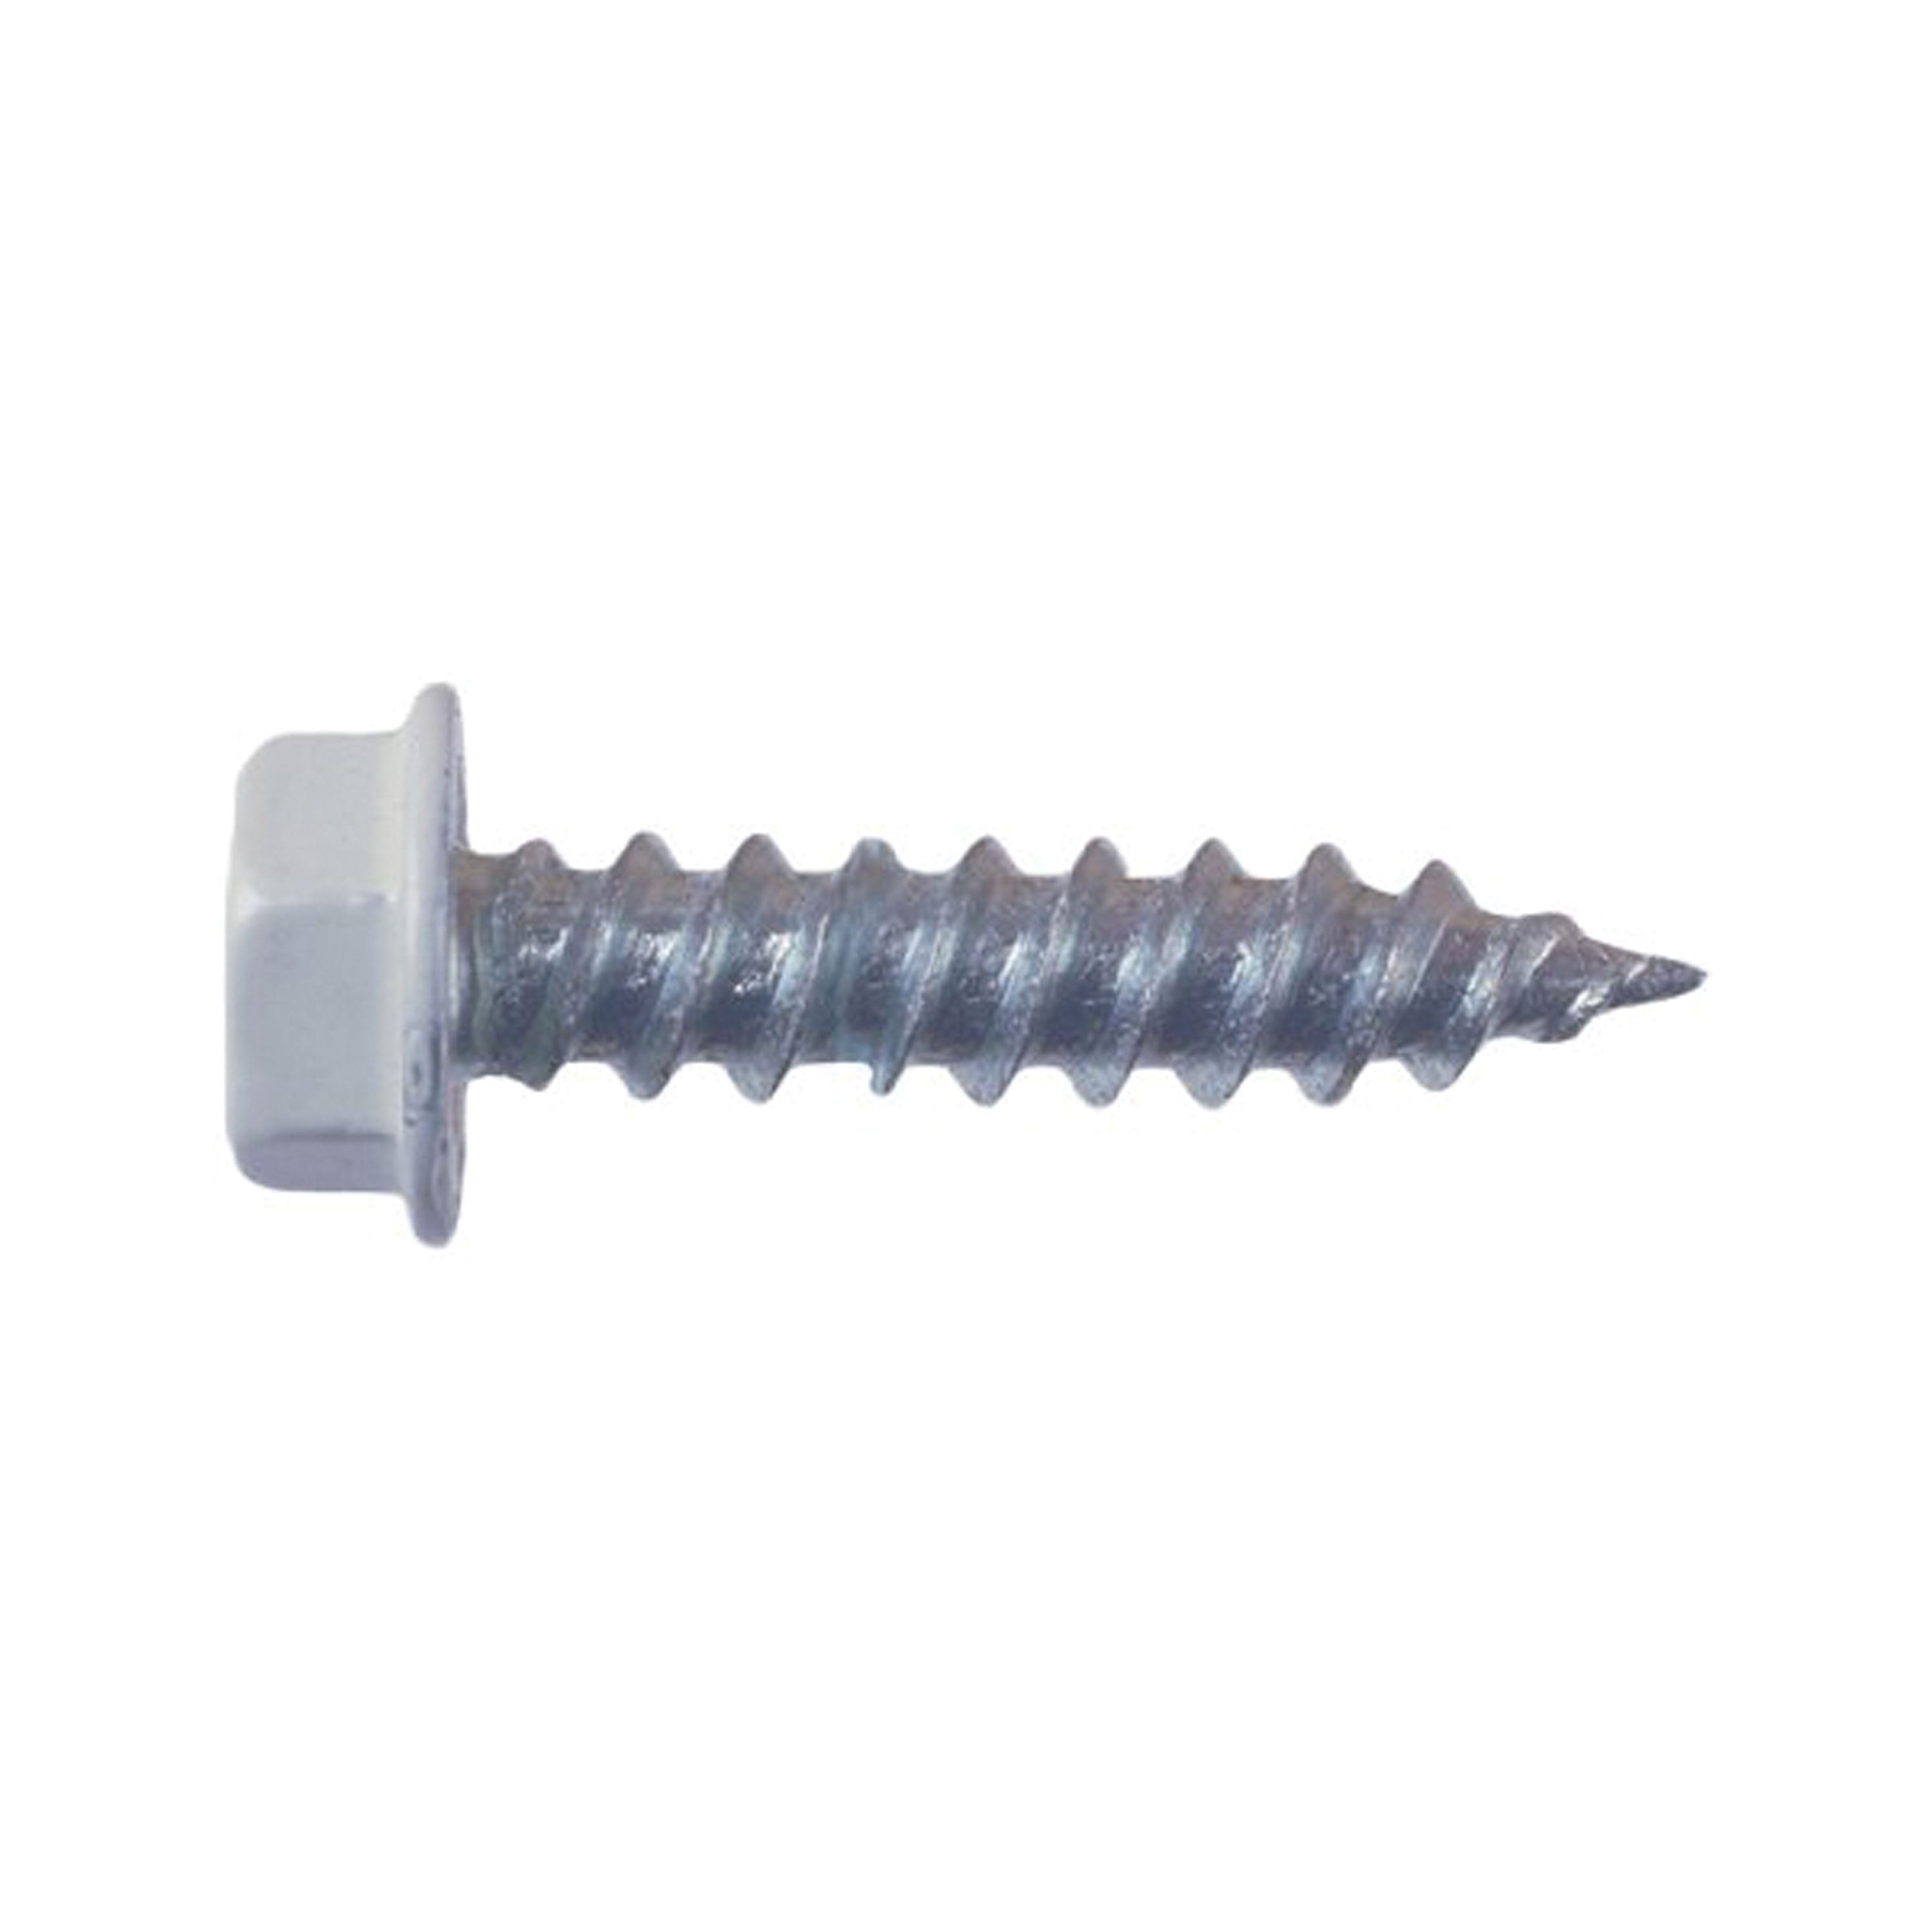 AP Products 012-TR50 W 8 X 3/4 MH/RV Unslotted Hex Washer Head Screw, Pack of 50 - 3/4", White